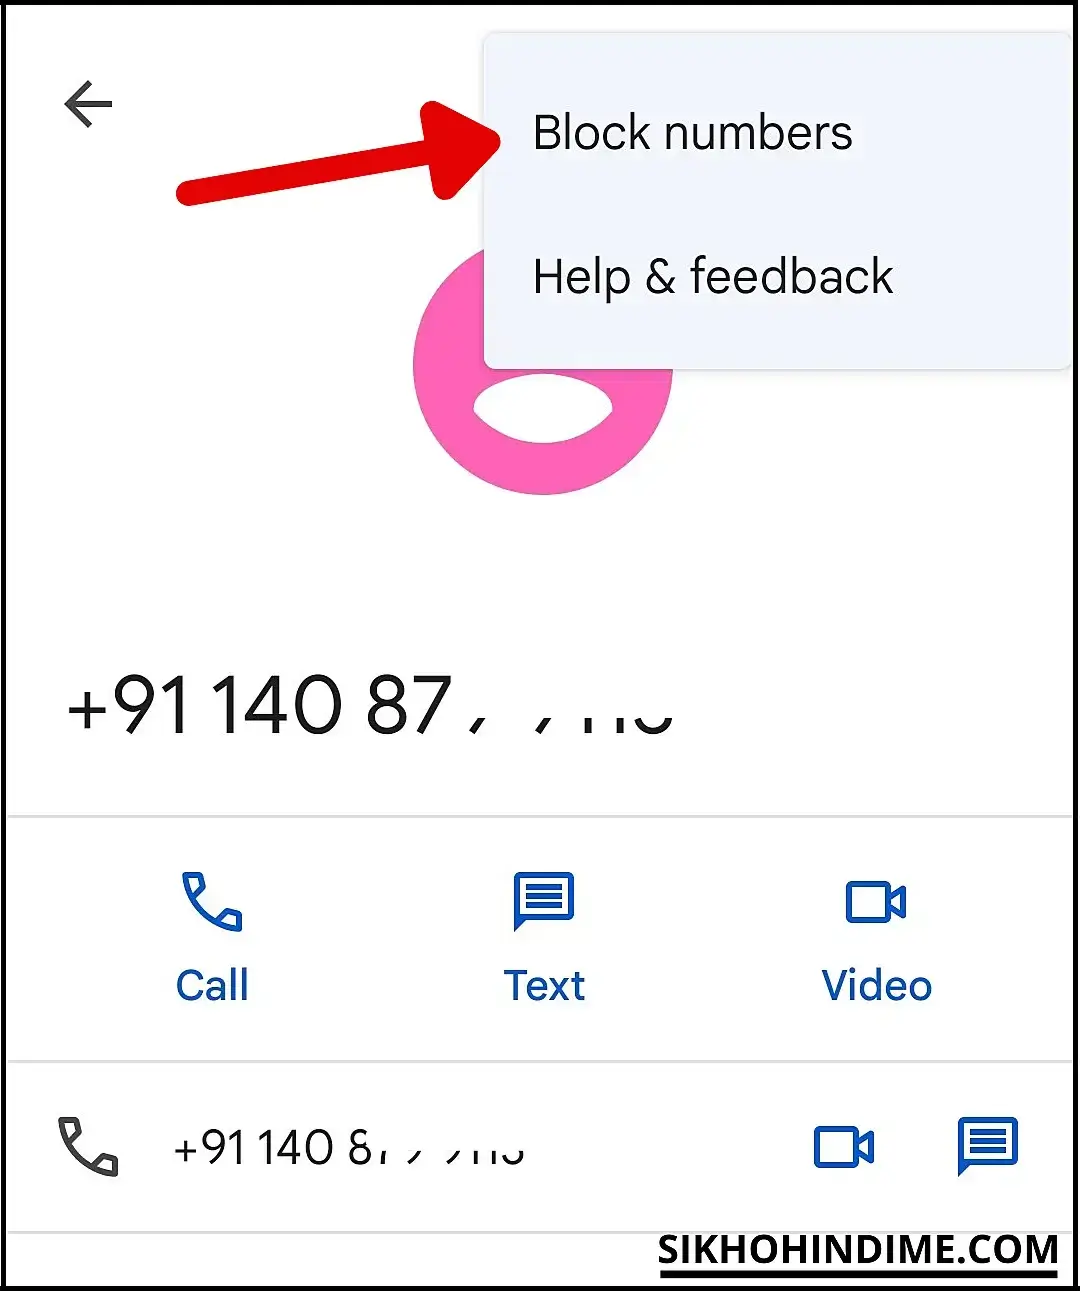 Click on block numbers